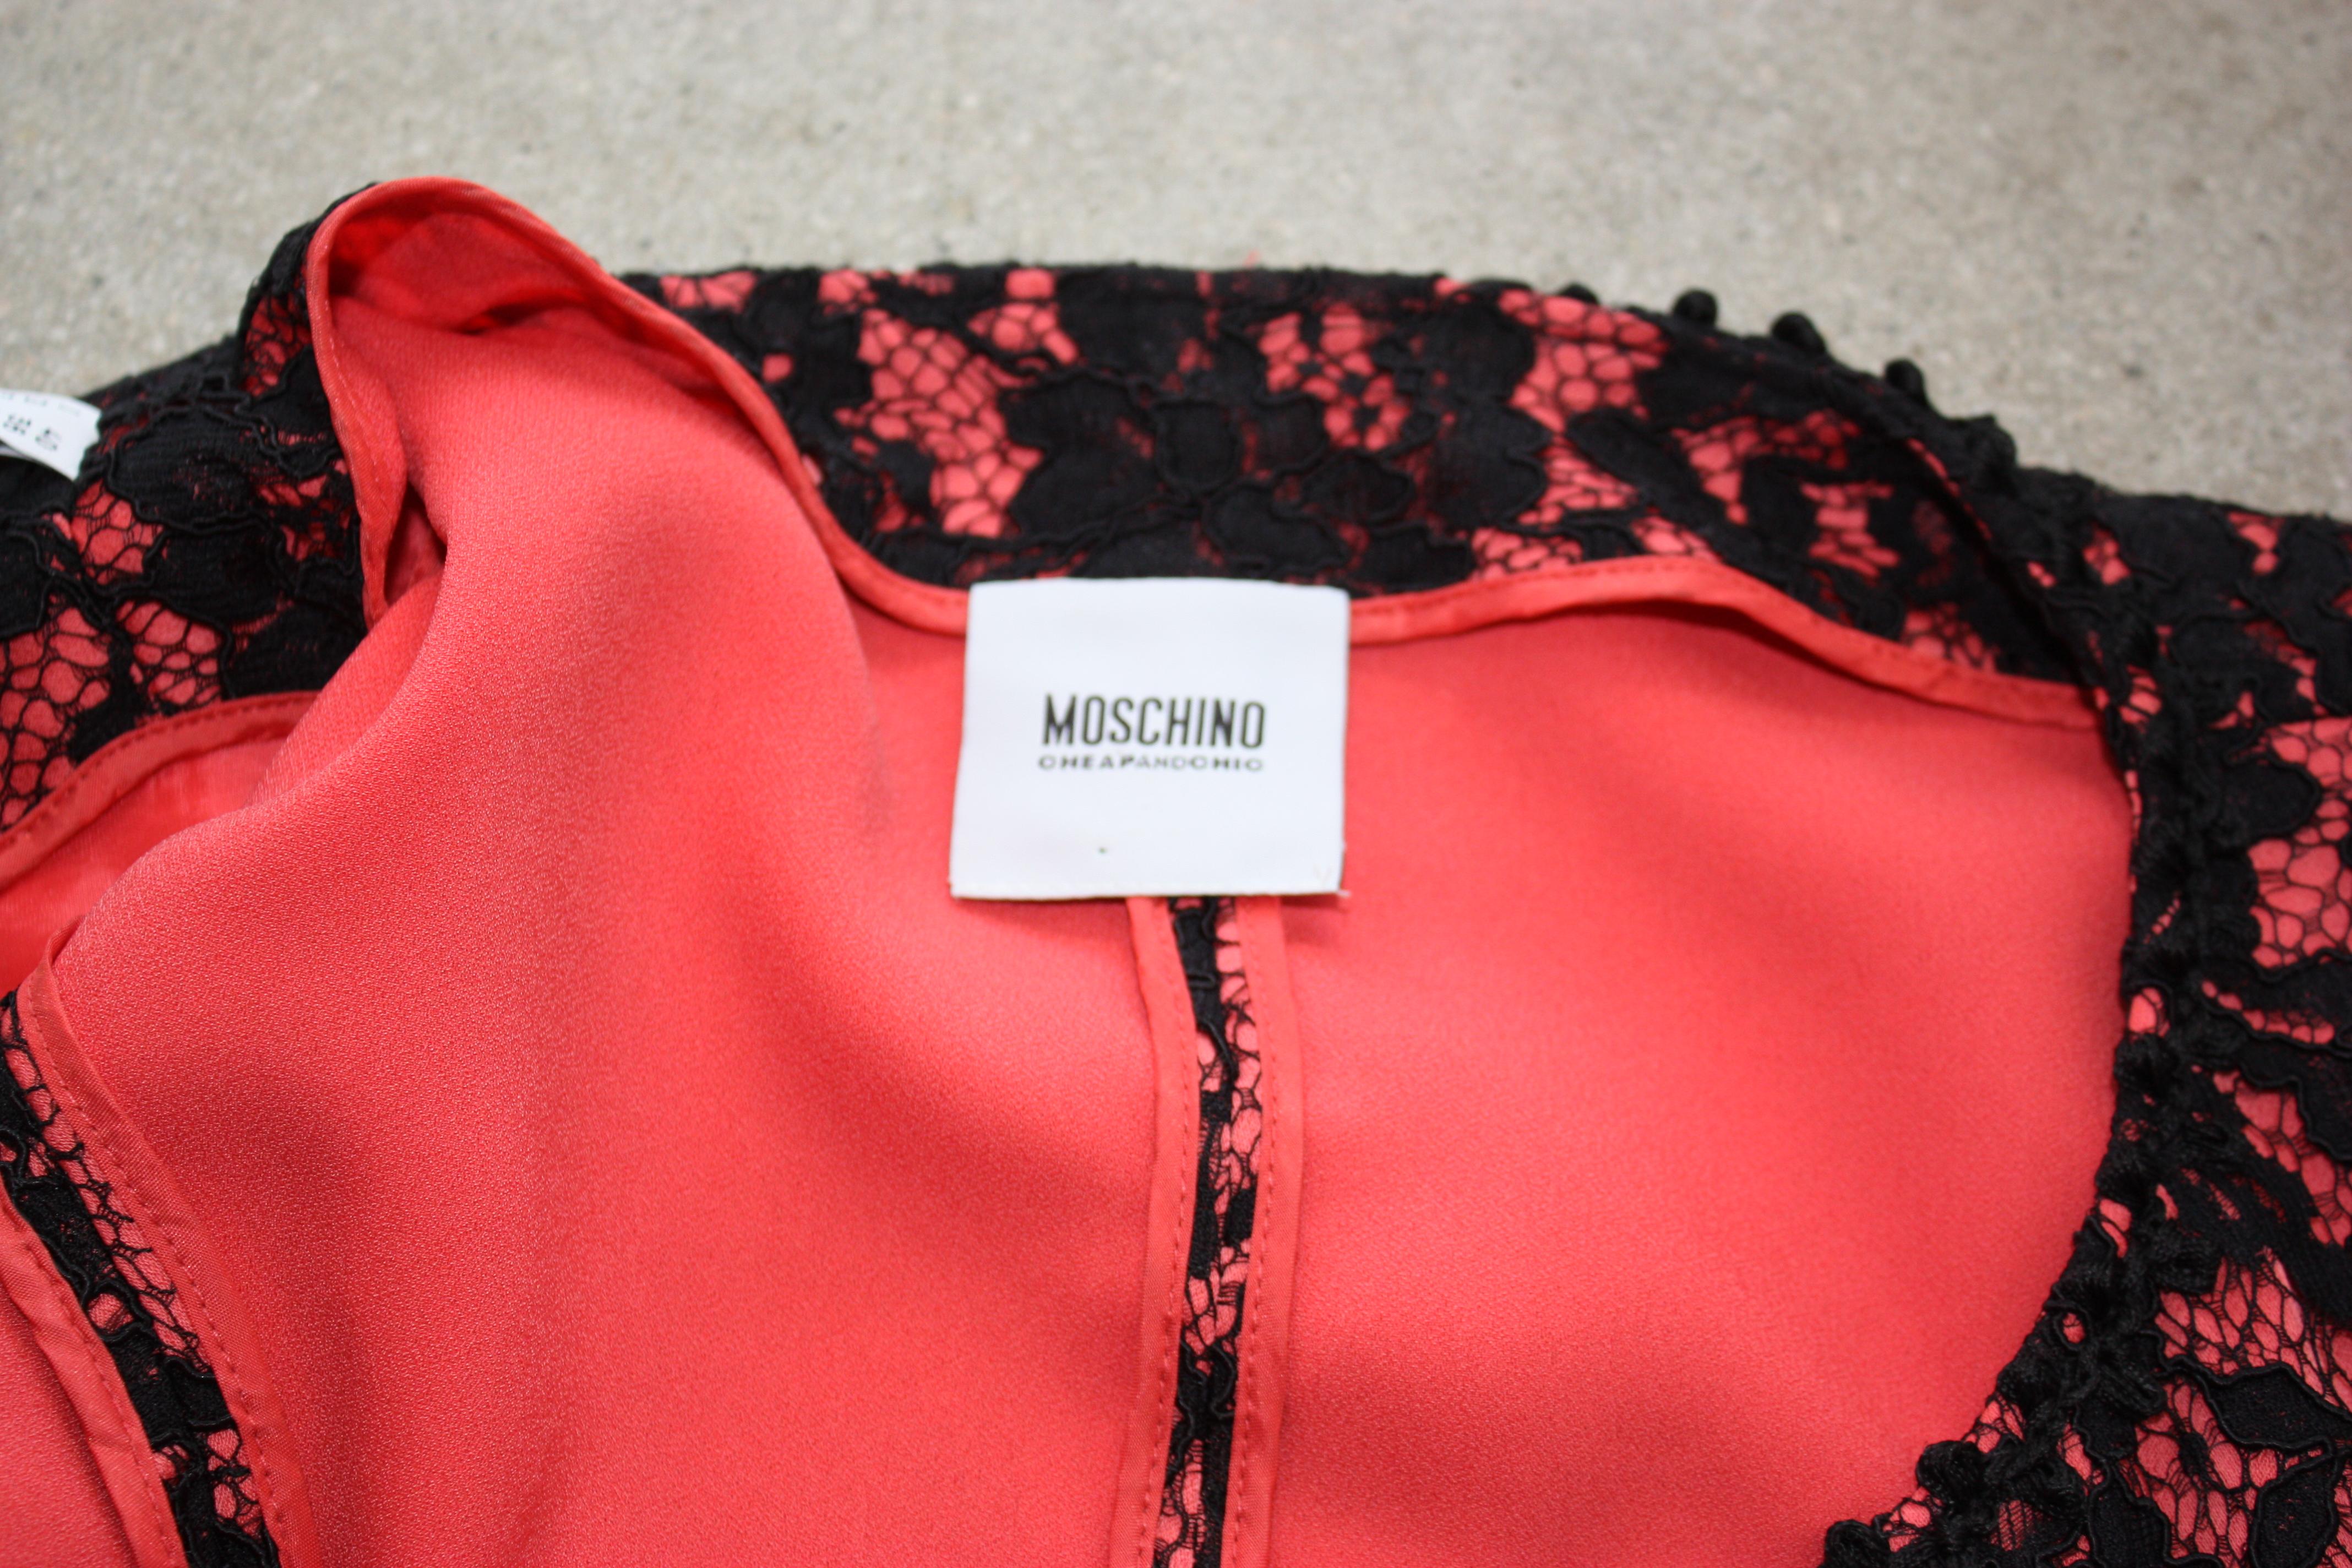 Moschino Cheap and Chic black and pink lace dress with bow waist detail. 
The coat dress has snap closures down the front, and could be worn as an overcoat or dress.

60% rayon, 40% polyamide. Lining 100% polyester.

Size 6.